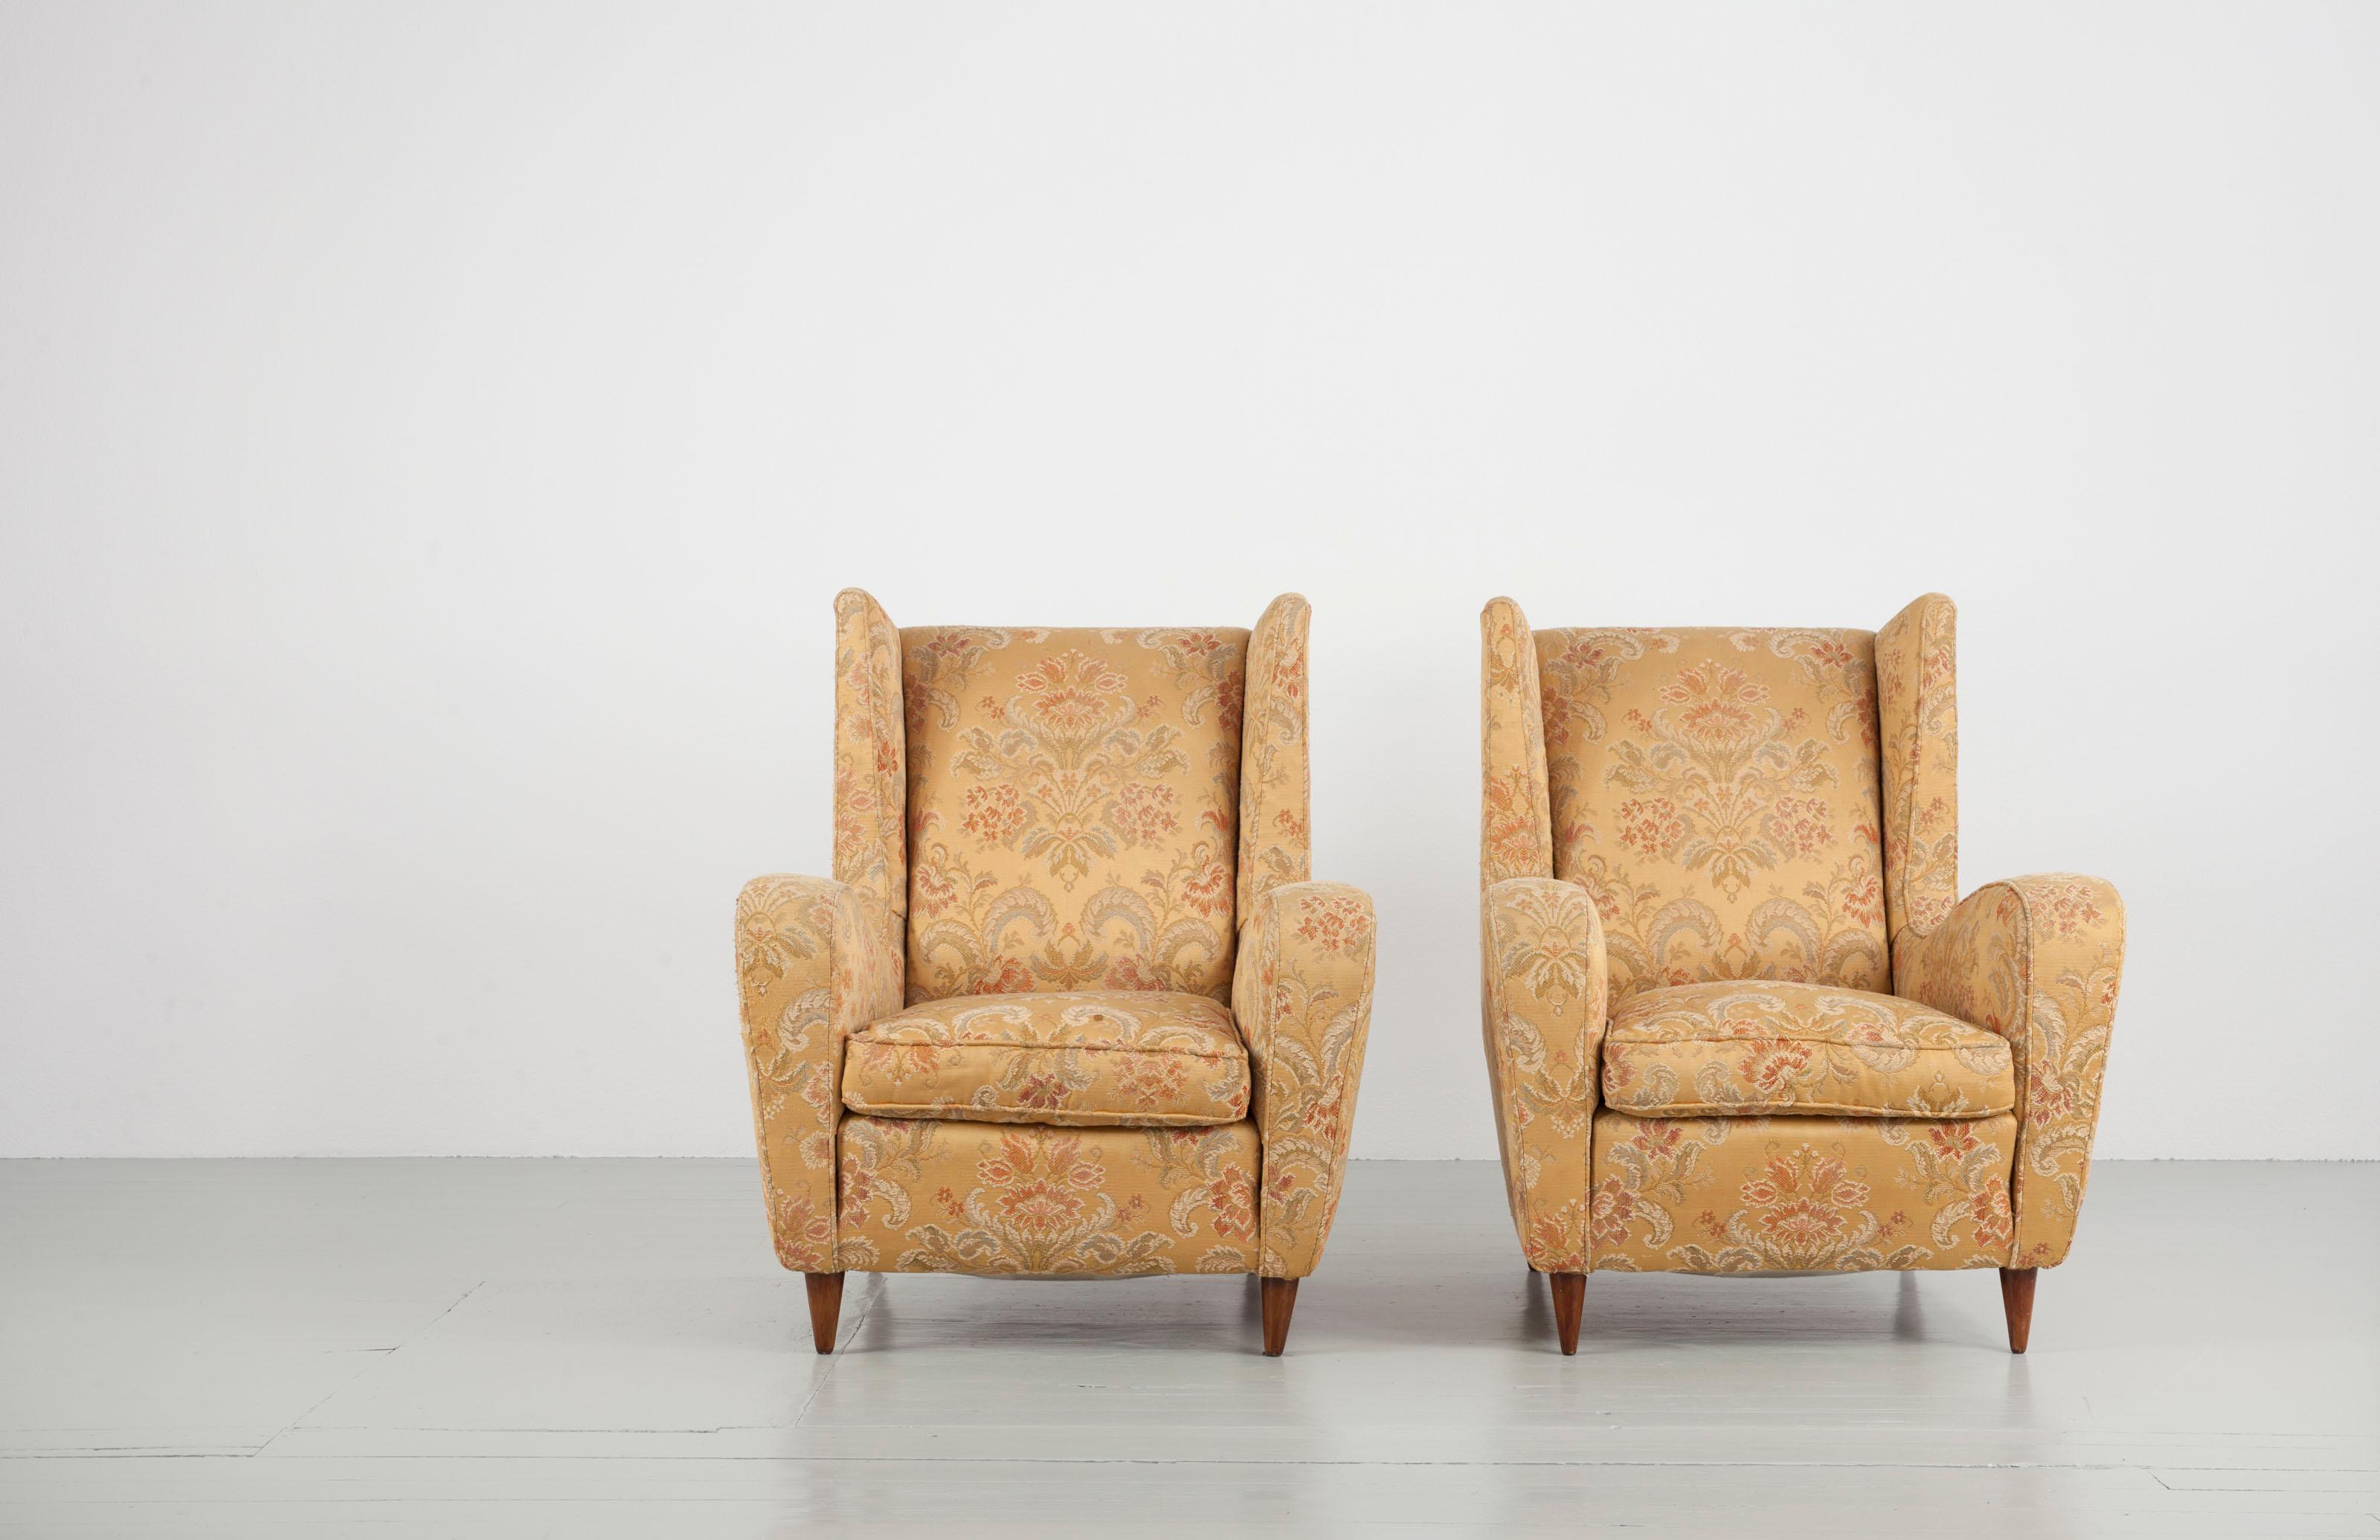 Set of two armchairs designed by Melchiorre Bega. These elegantly proportioned wingback chairs feature tapered walnut legs and are upholstered in their original fabric in a golden colour and with ornamentals.

Feel free to contact us for more